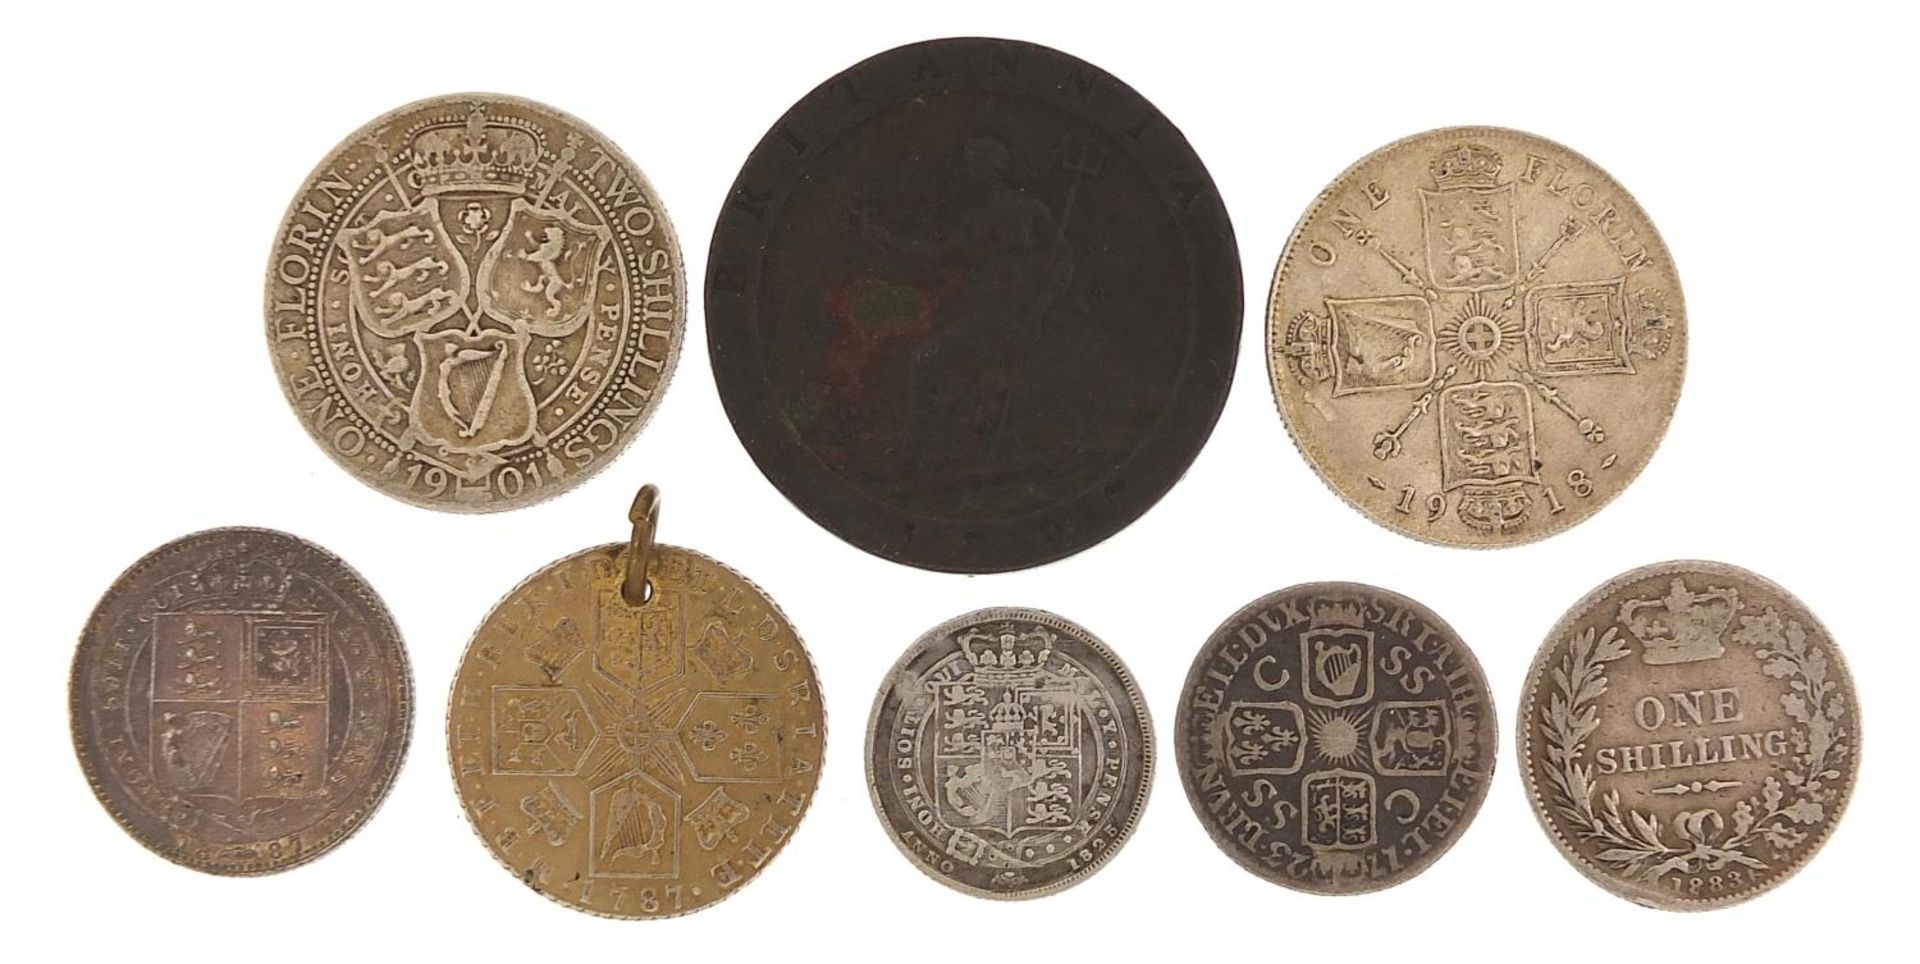 George III and later silver and copper coinage including 1787 shilling and 1723 sixpence, 73.g